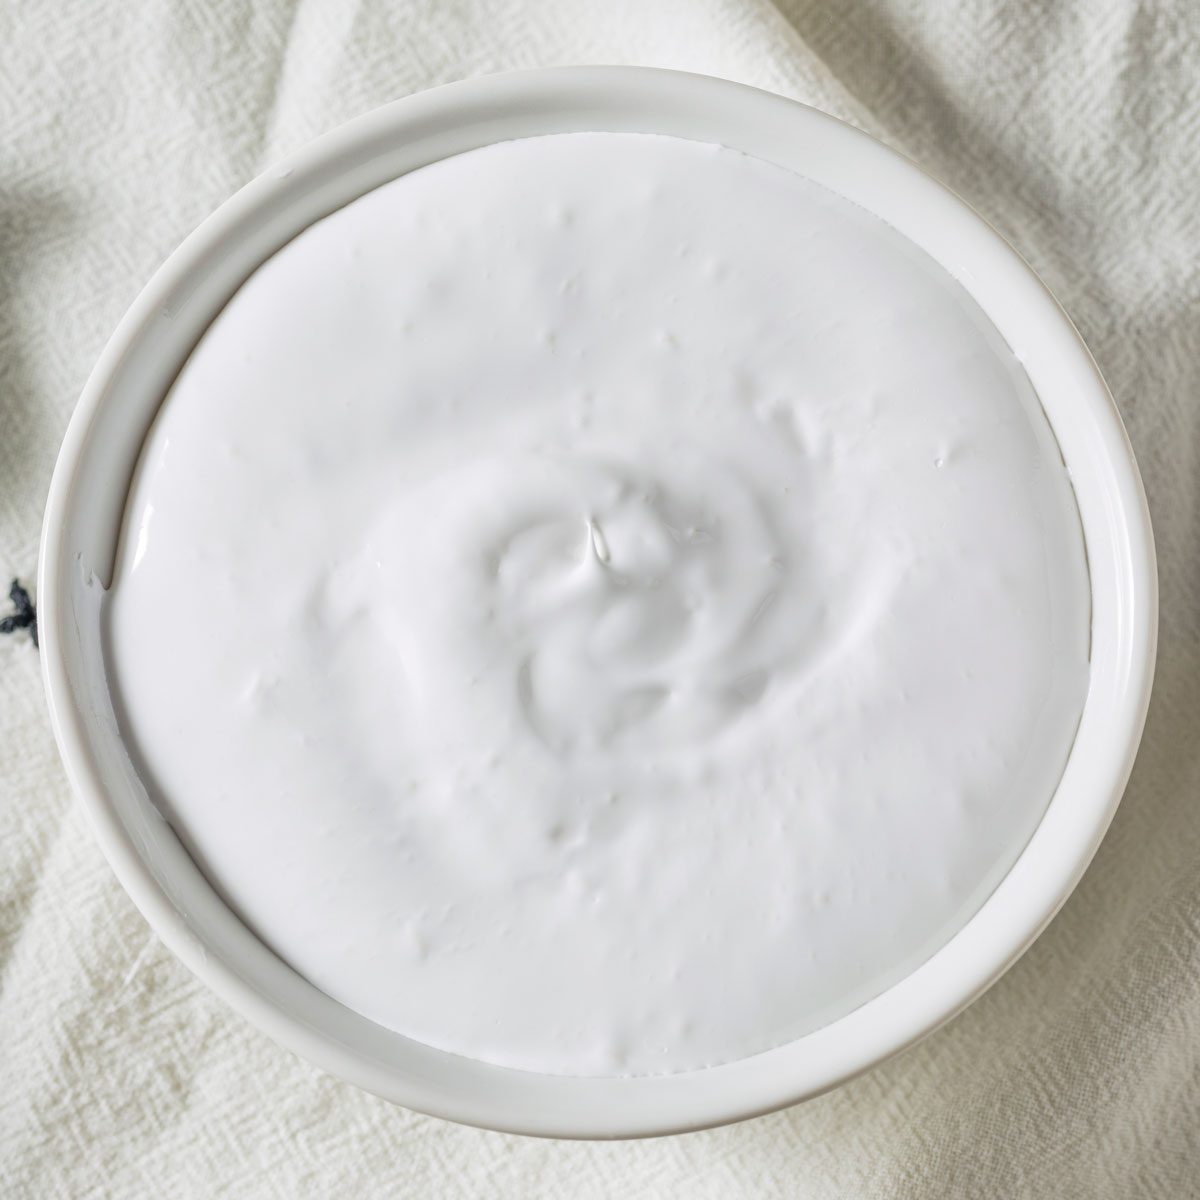 Sweet Sticky Marshmallow Fluff Spread In A Bowl